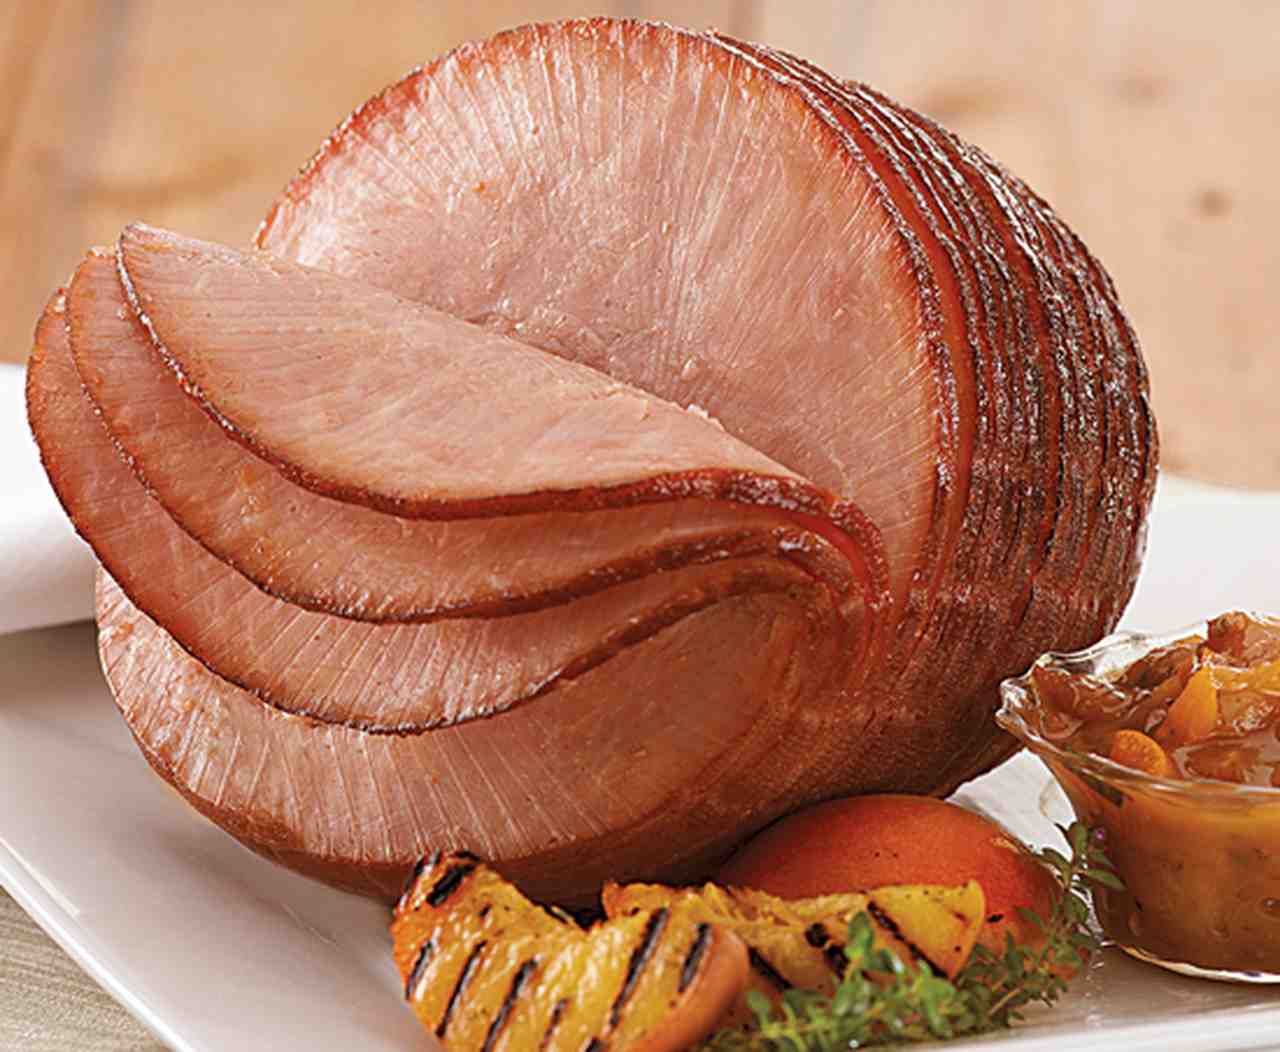 Why is ham always pre cooked?